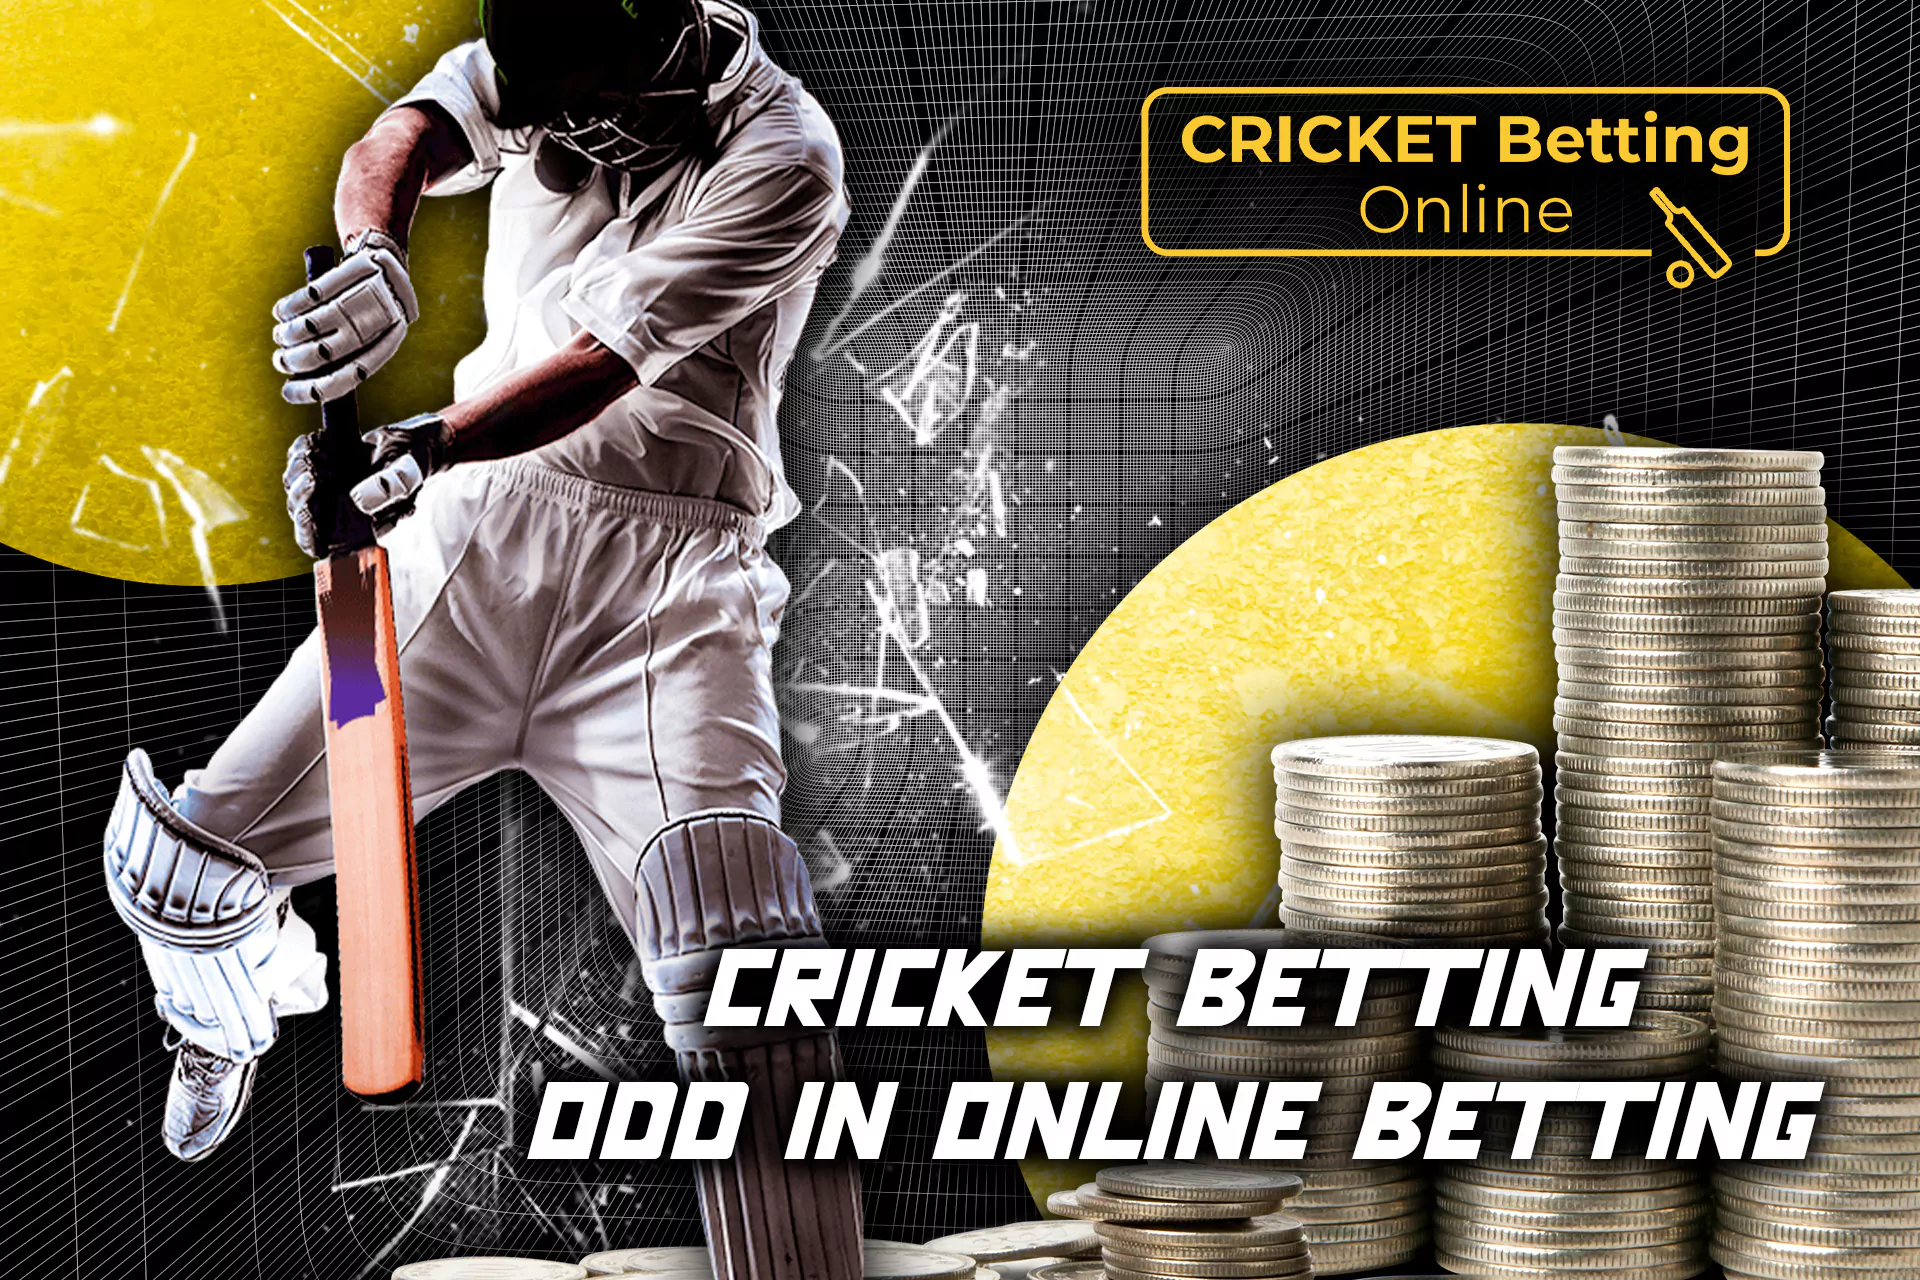 Get the best online cricket betting odds using professional's tips.